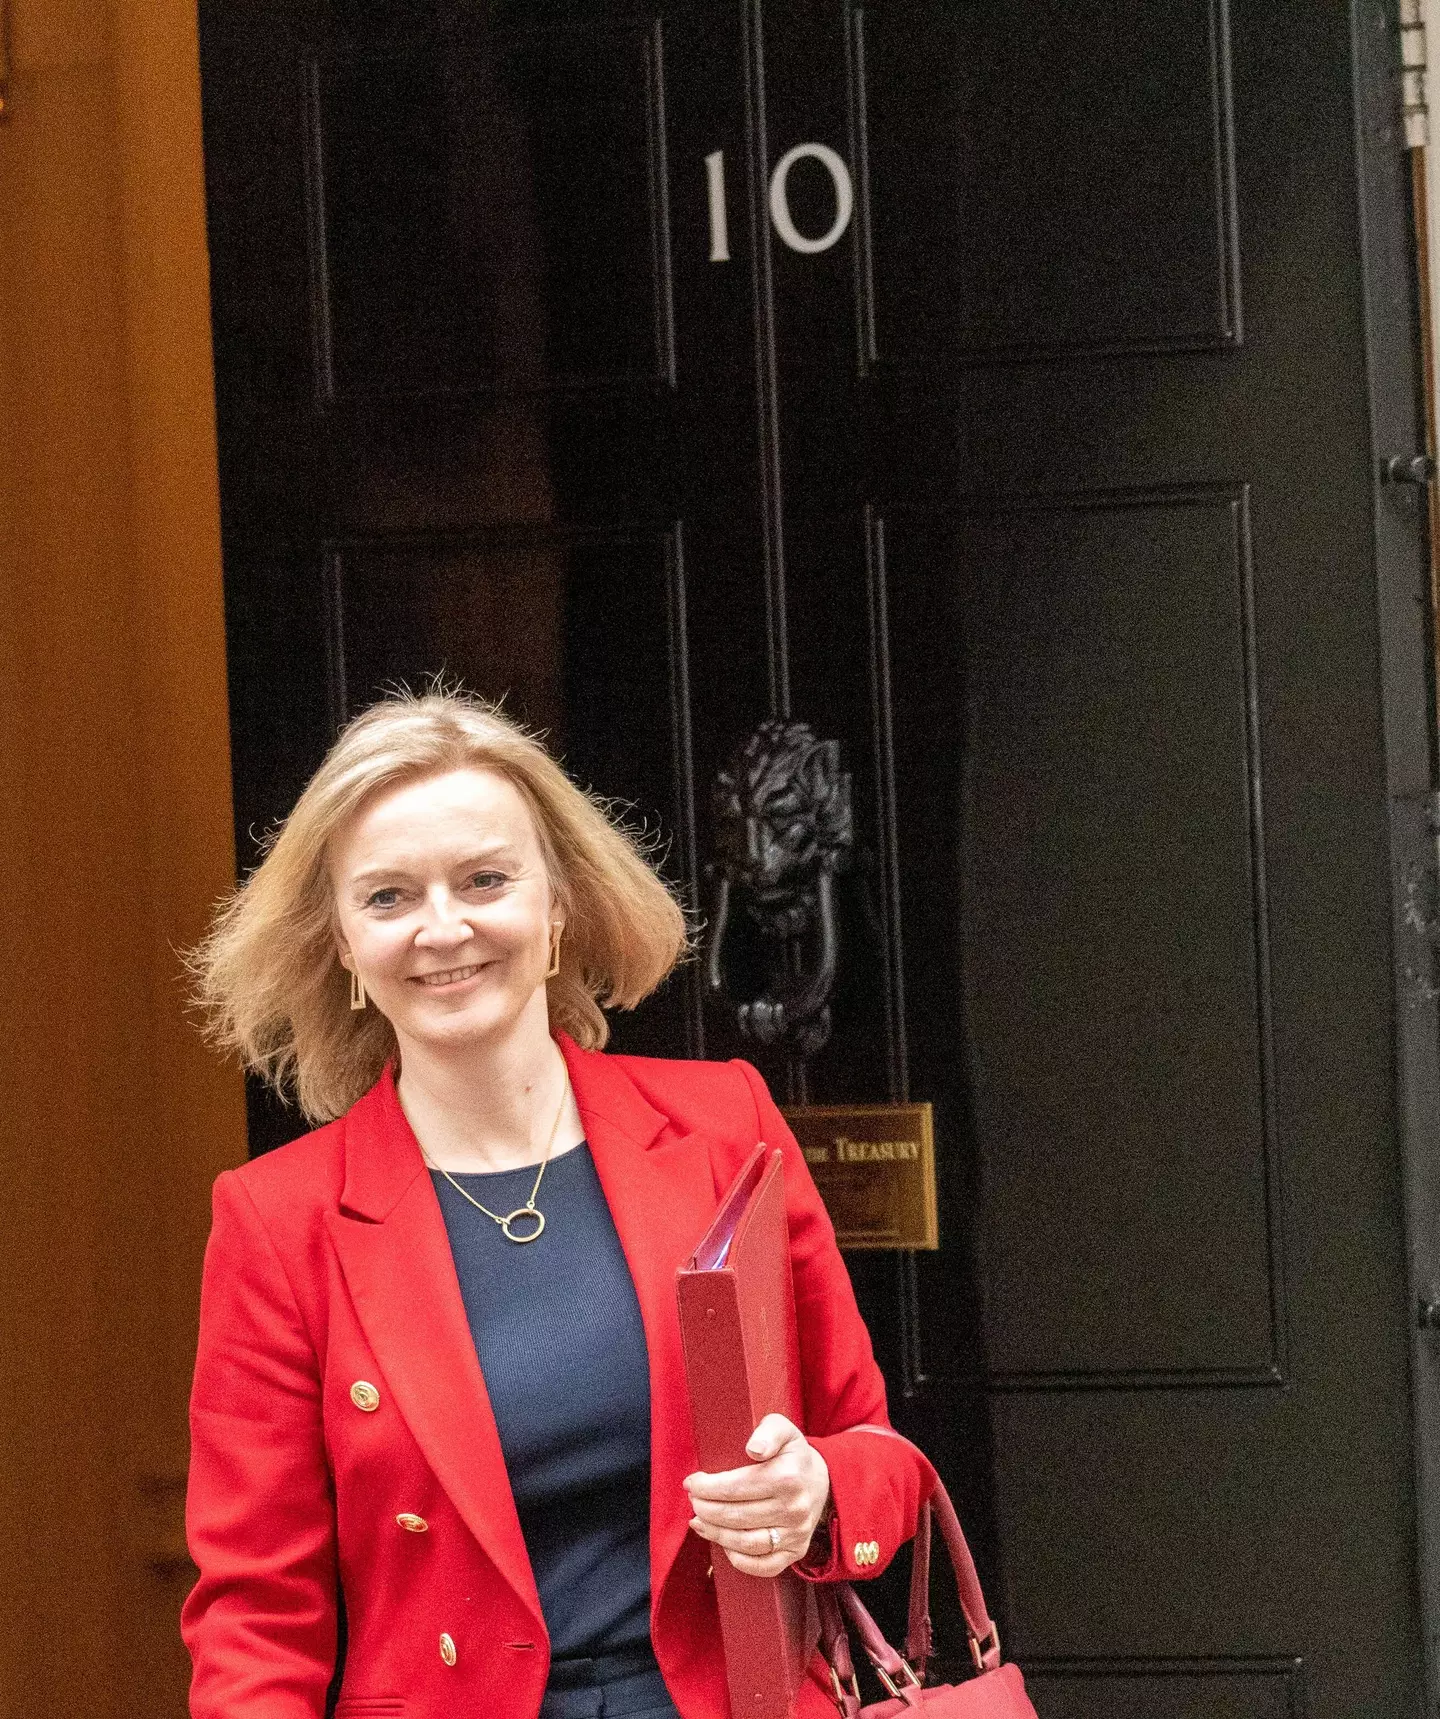 Liz Truss is the new prime minister of the UK.